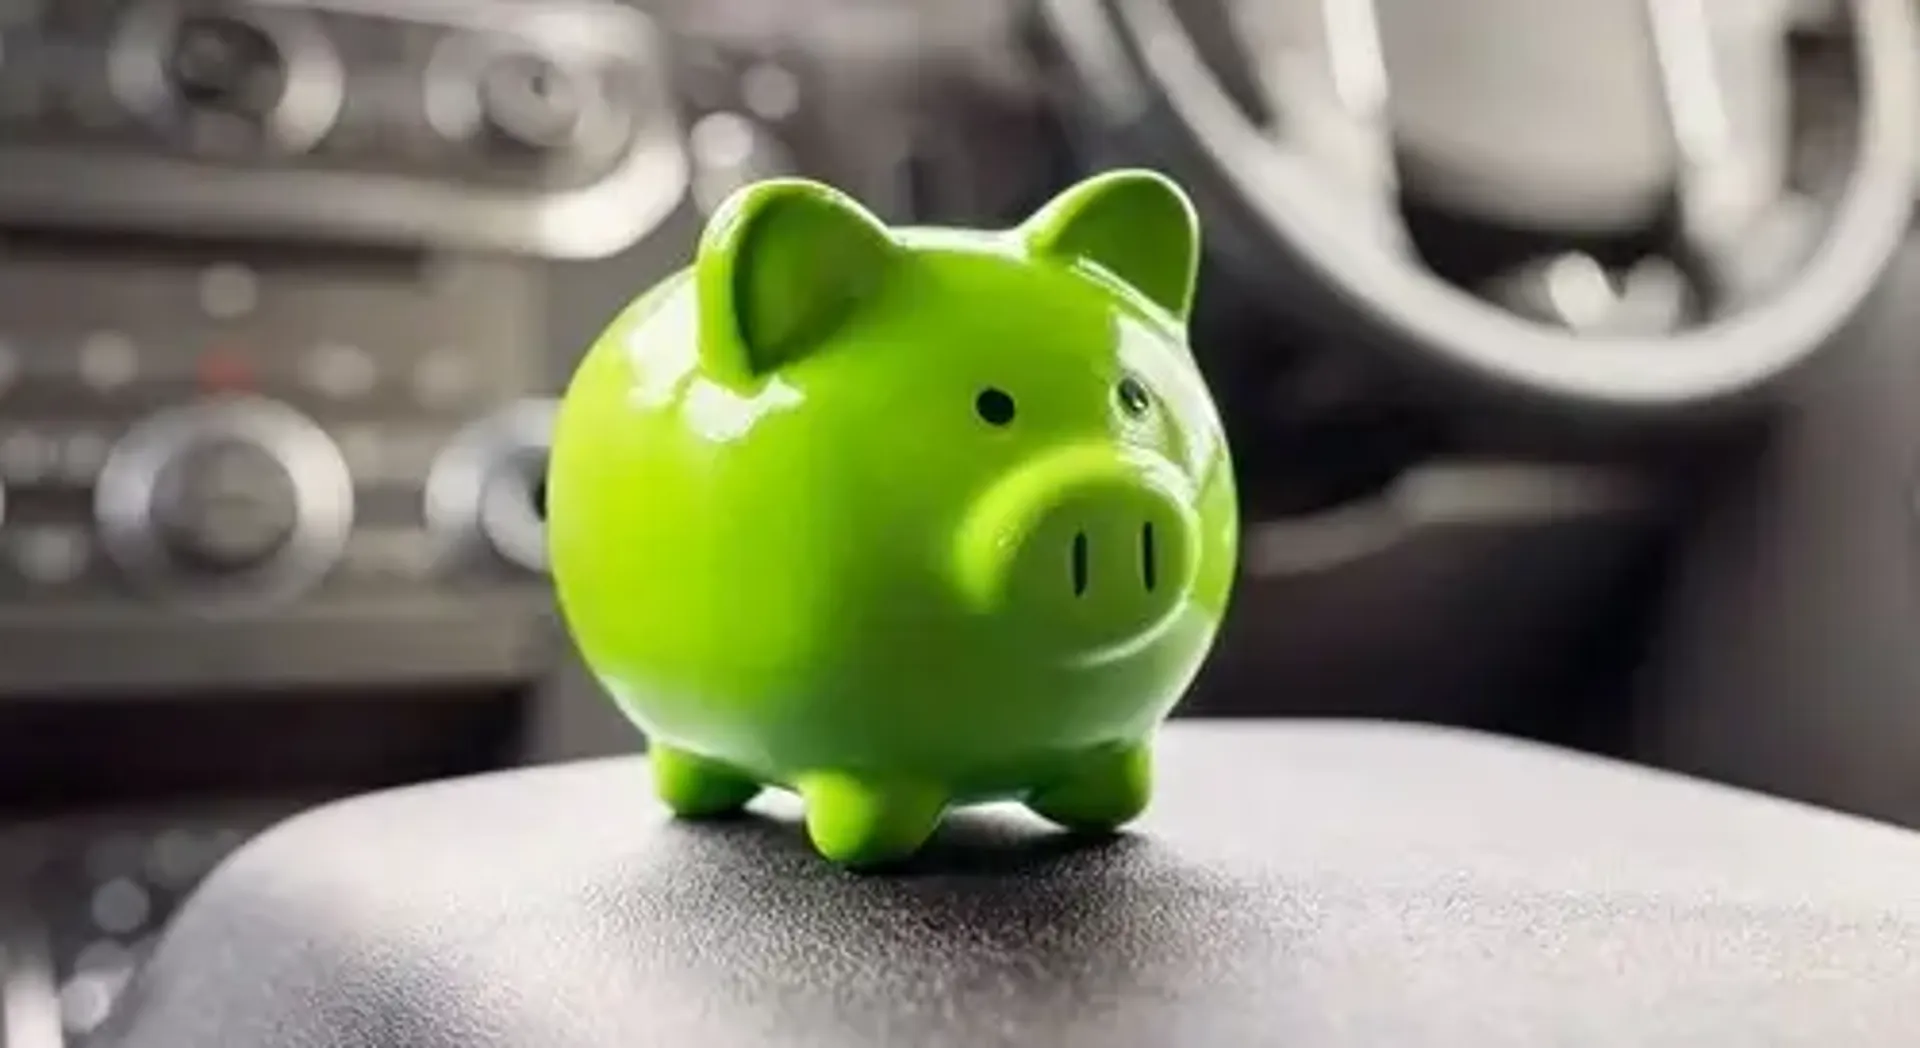 A green piggy bank on a car's dashboard, symbolizing savings and financial planning.